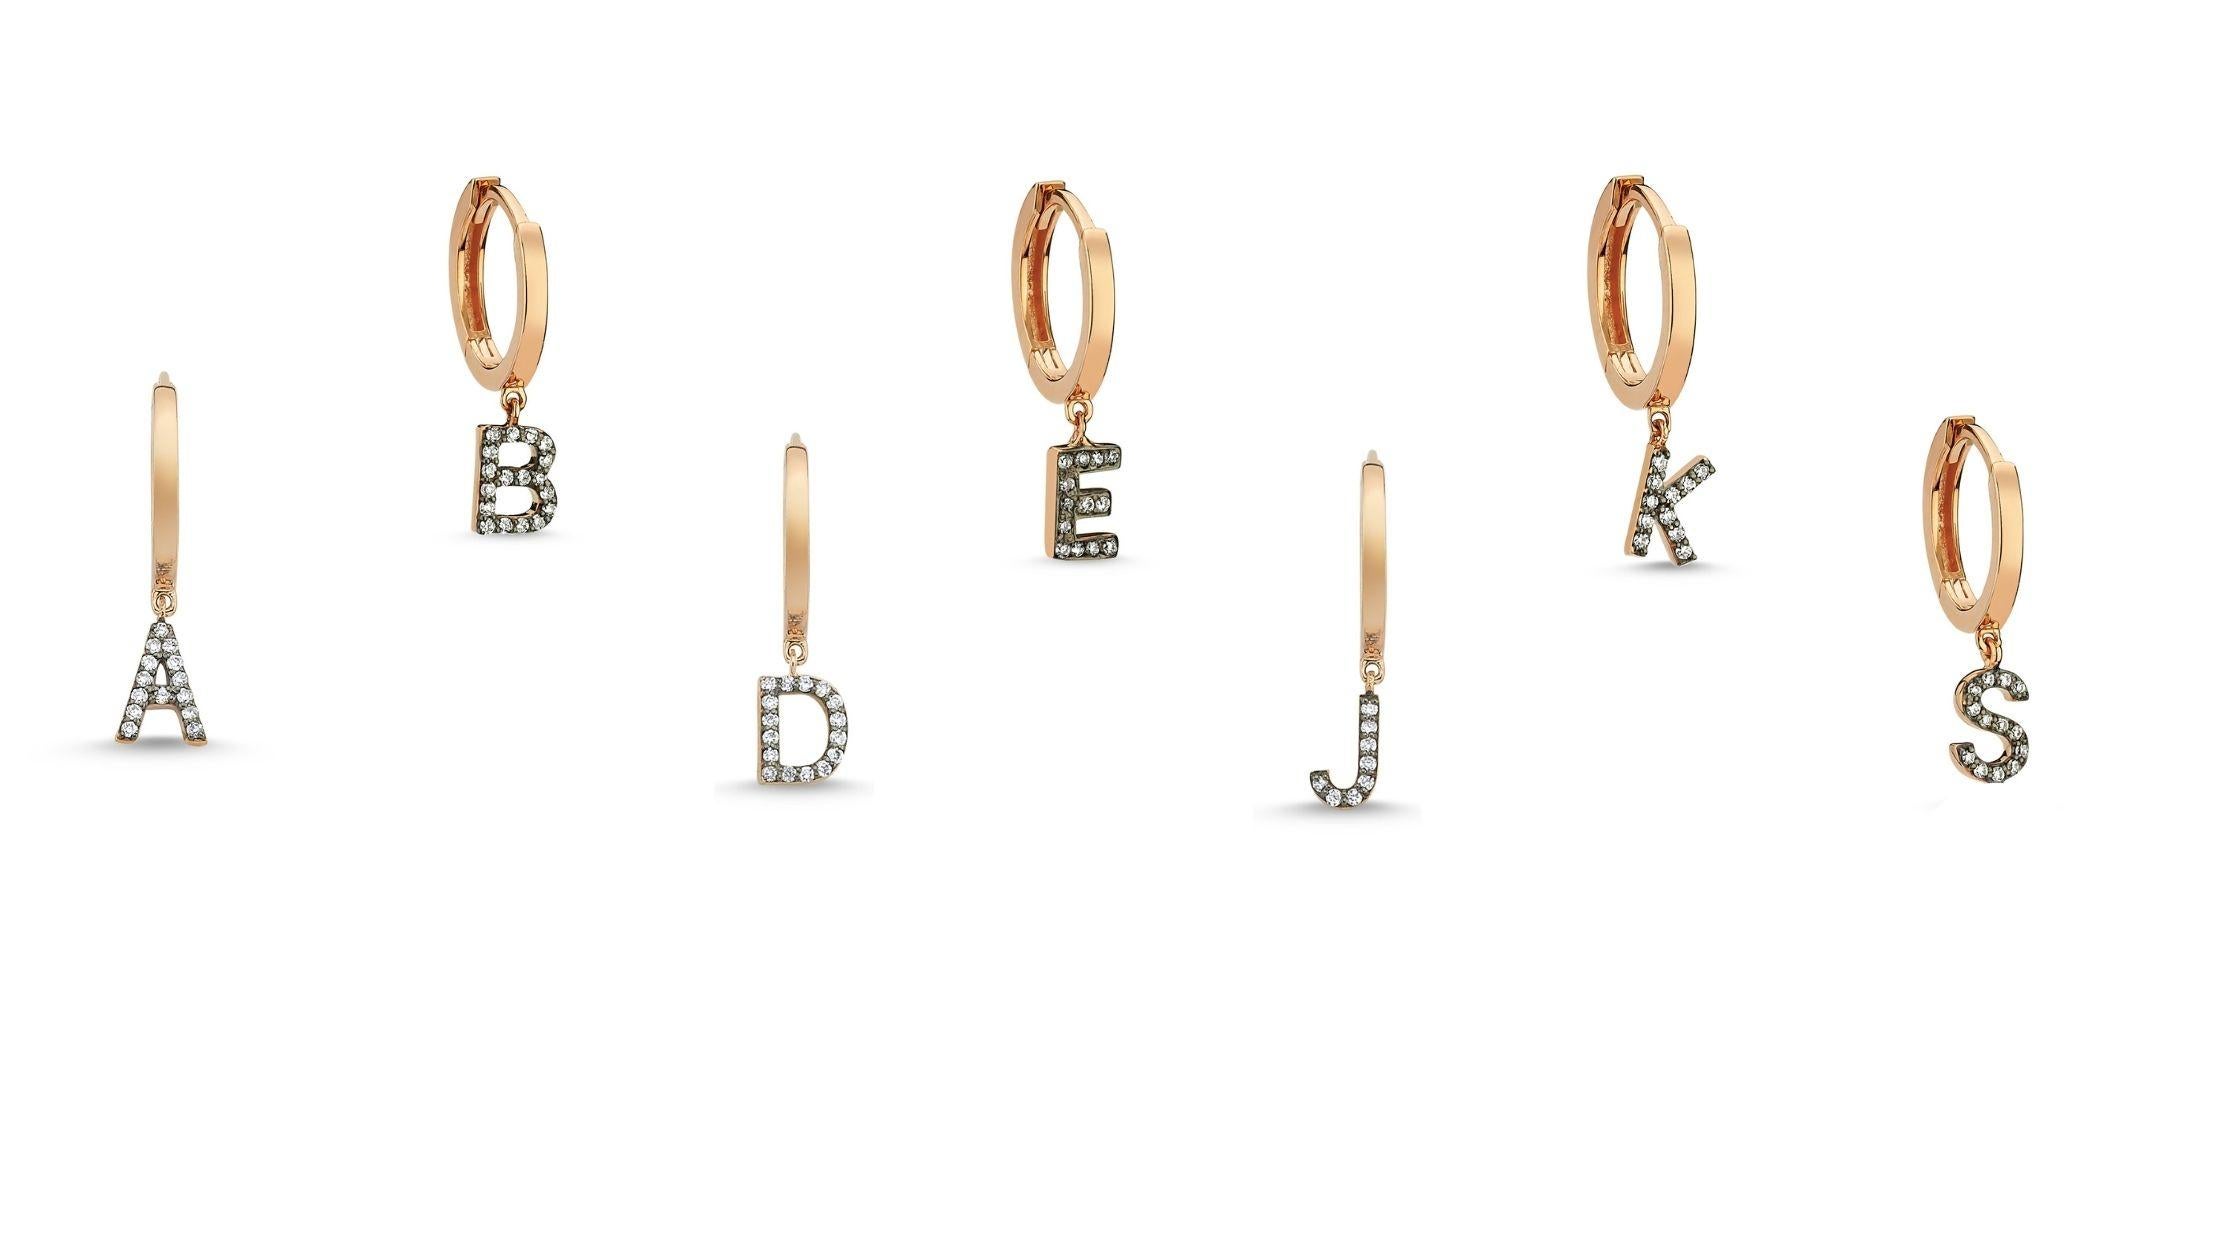 Letter D (single) 14k rose gold earring with white diamond by Selda Jewellery

Additional Information:-
Collection: Letter Collection
14k Rose gold
0.06ct White diamond
Letter height 1cm